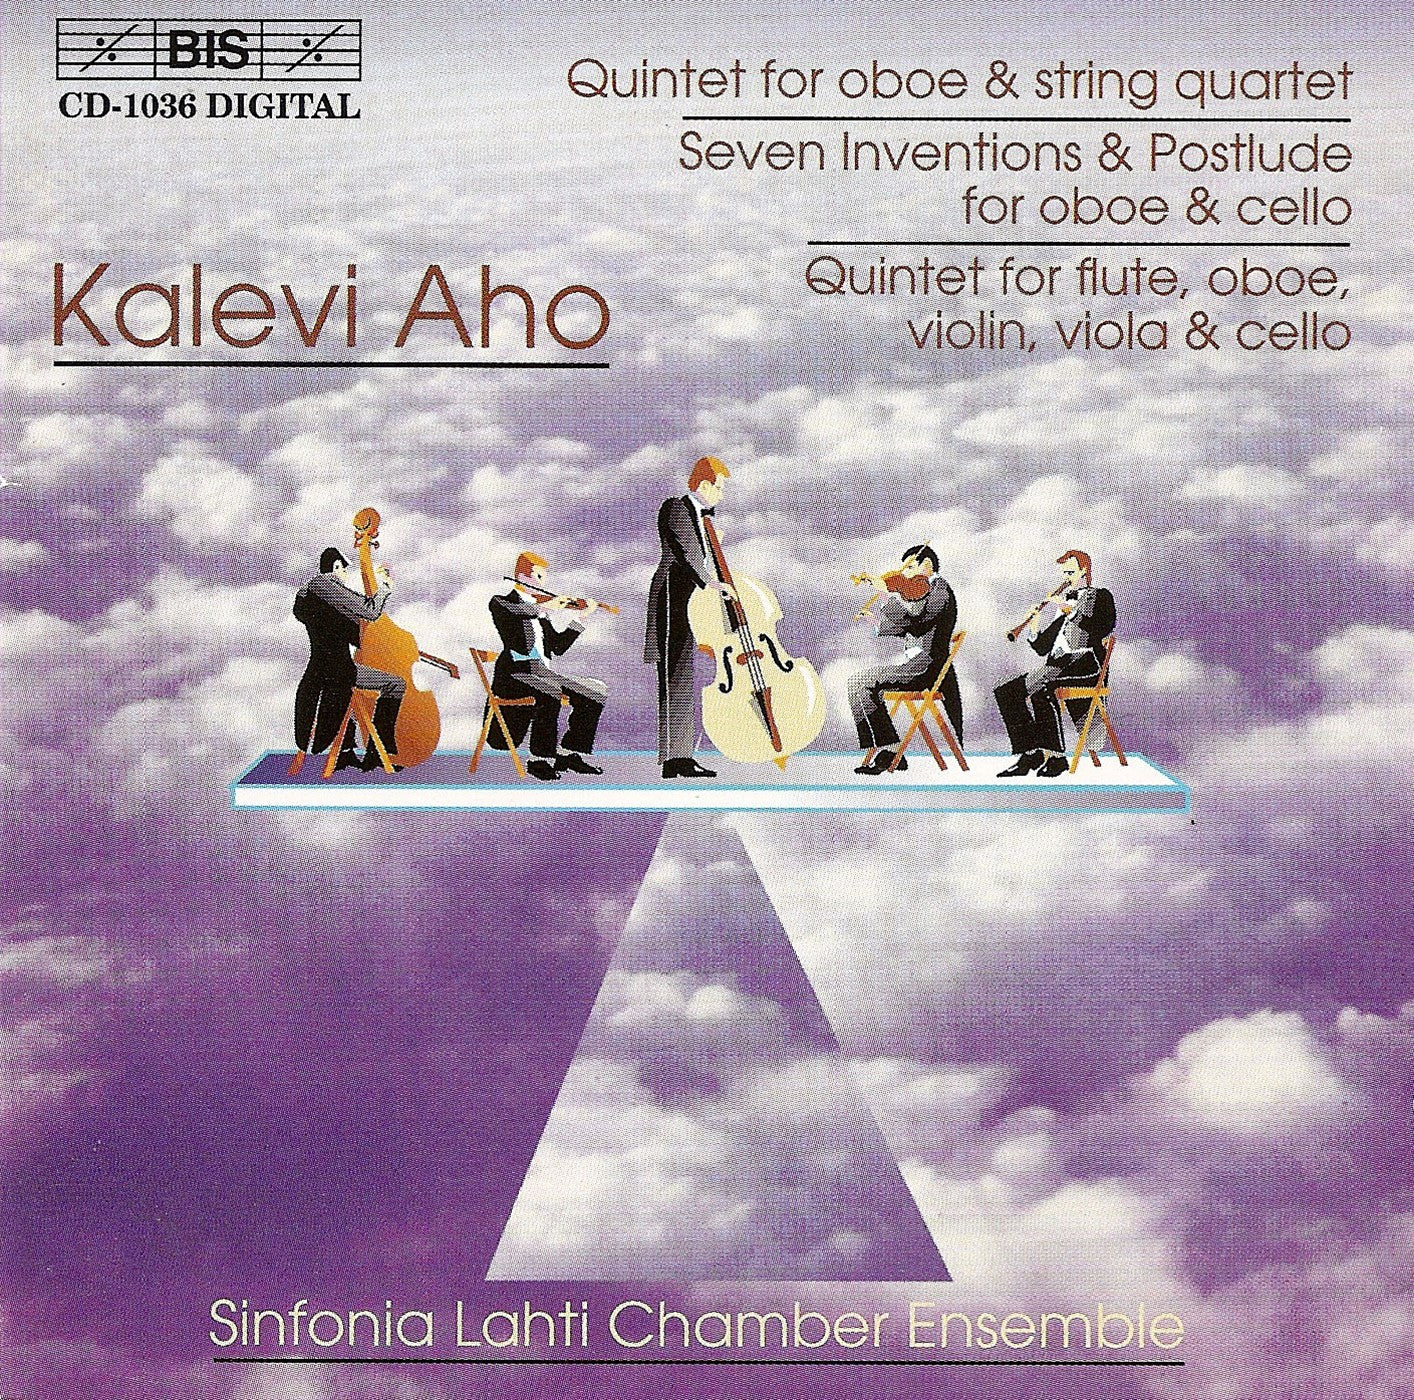 Aho: Oboe Quintet / 7 Inventions And Postlude / Flute, Oboe